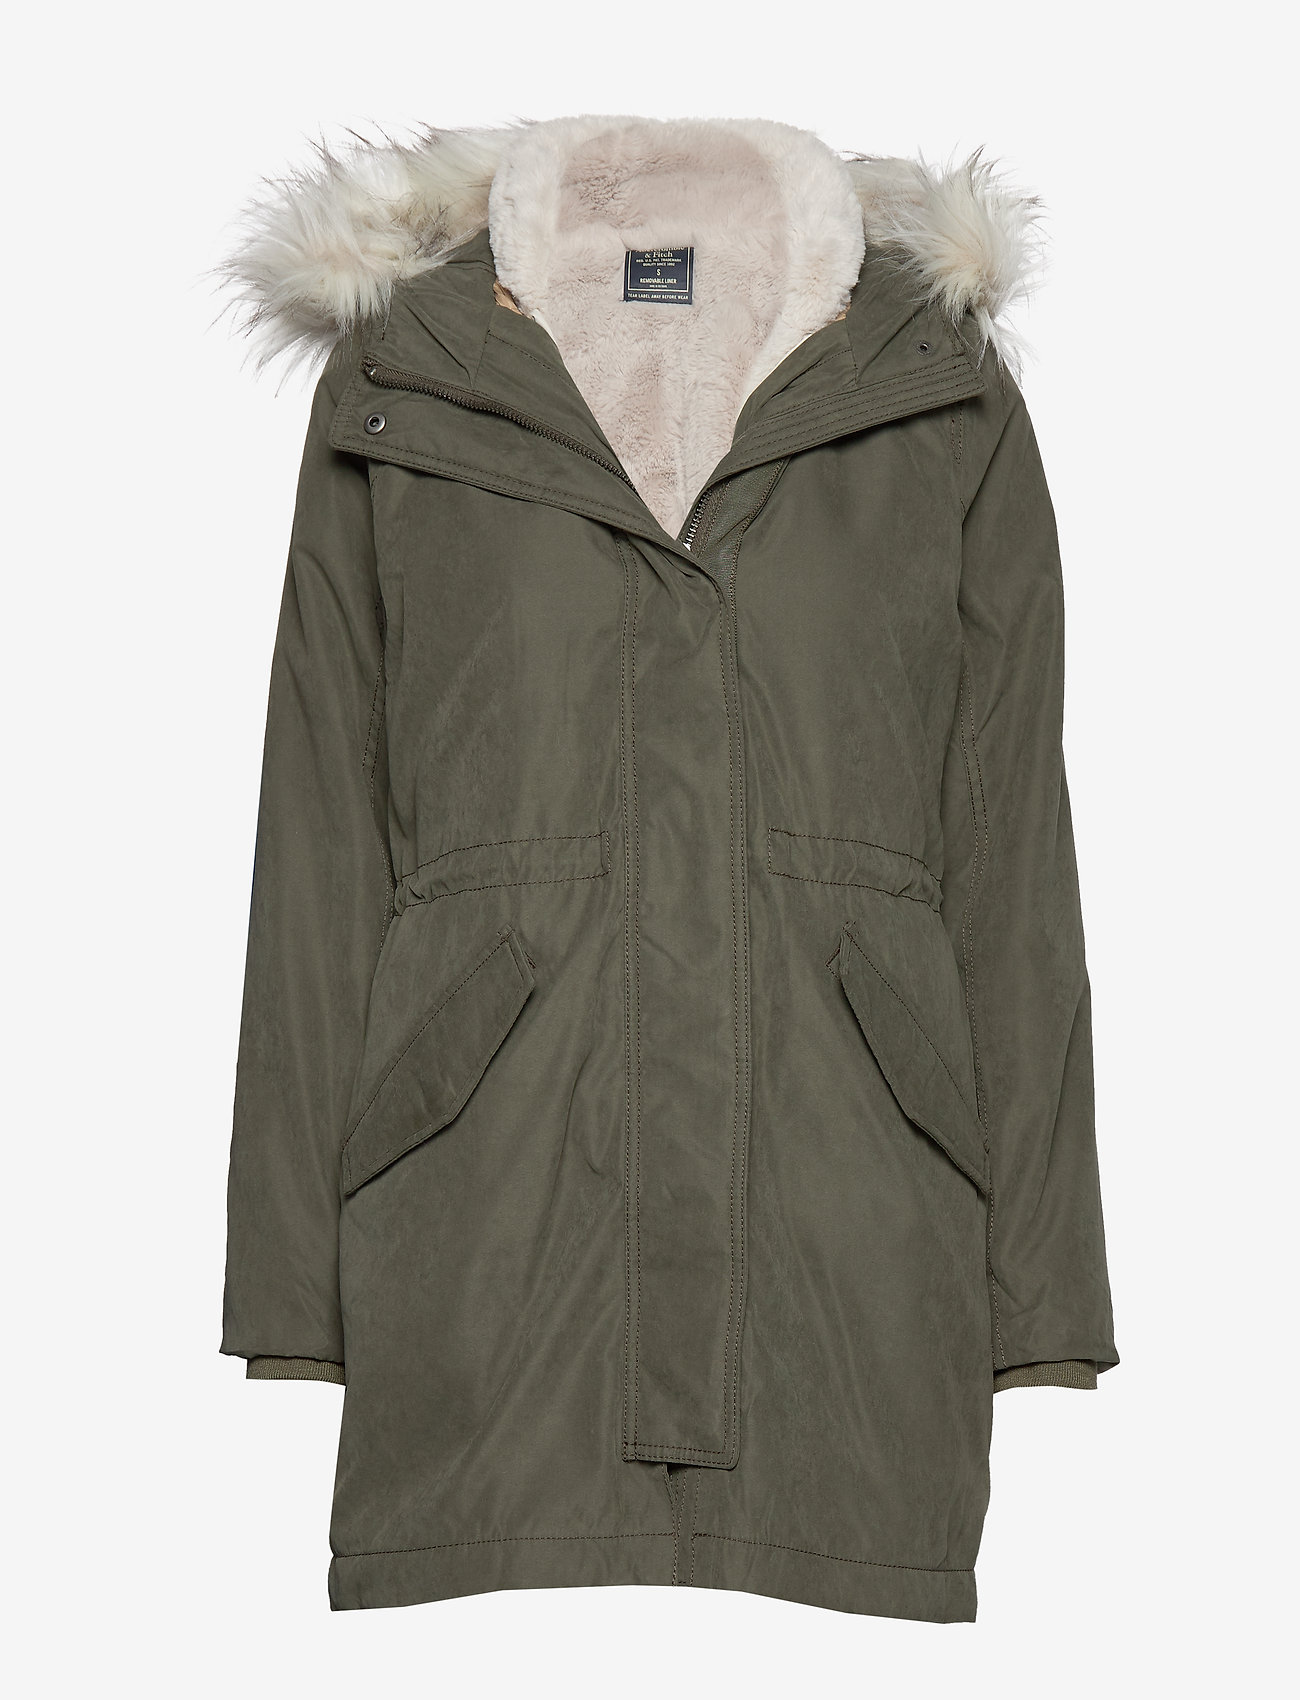 abercrombie and fitch parka jacket